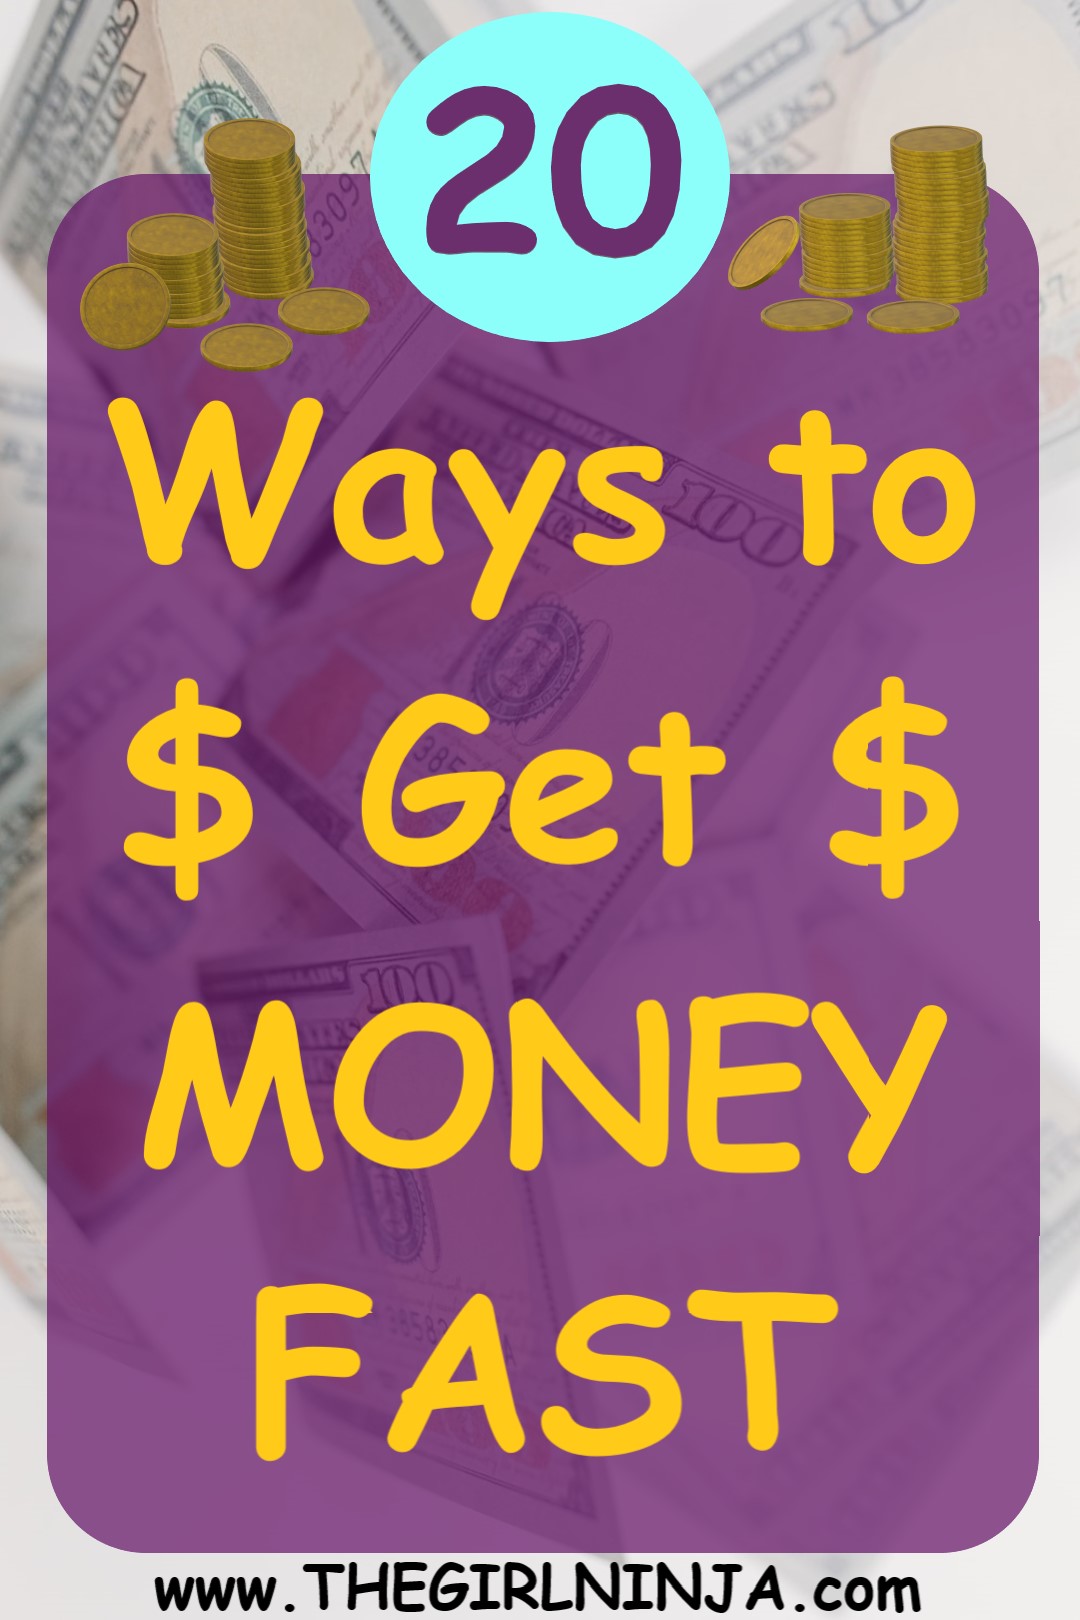 100 dollar bills falling through the air with yellow text that reads 20 Ways to $ Get $ MONEY FAST. Black text at bottom center reads www.THEGIRLNINJA.com